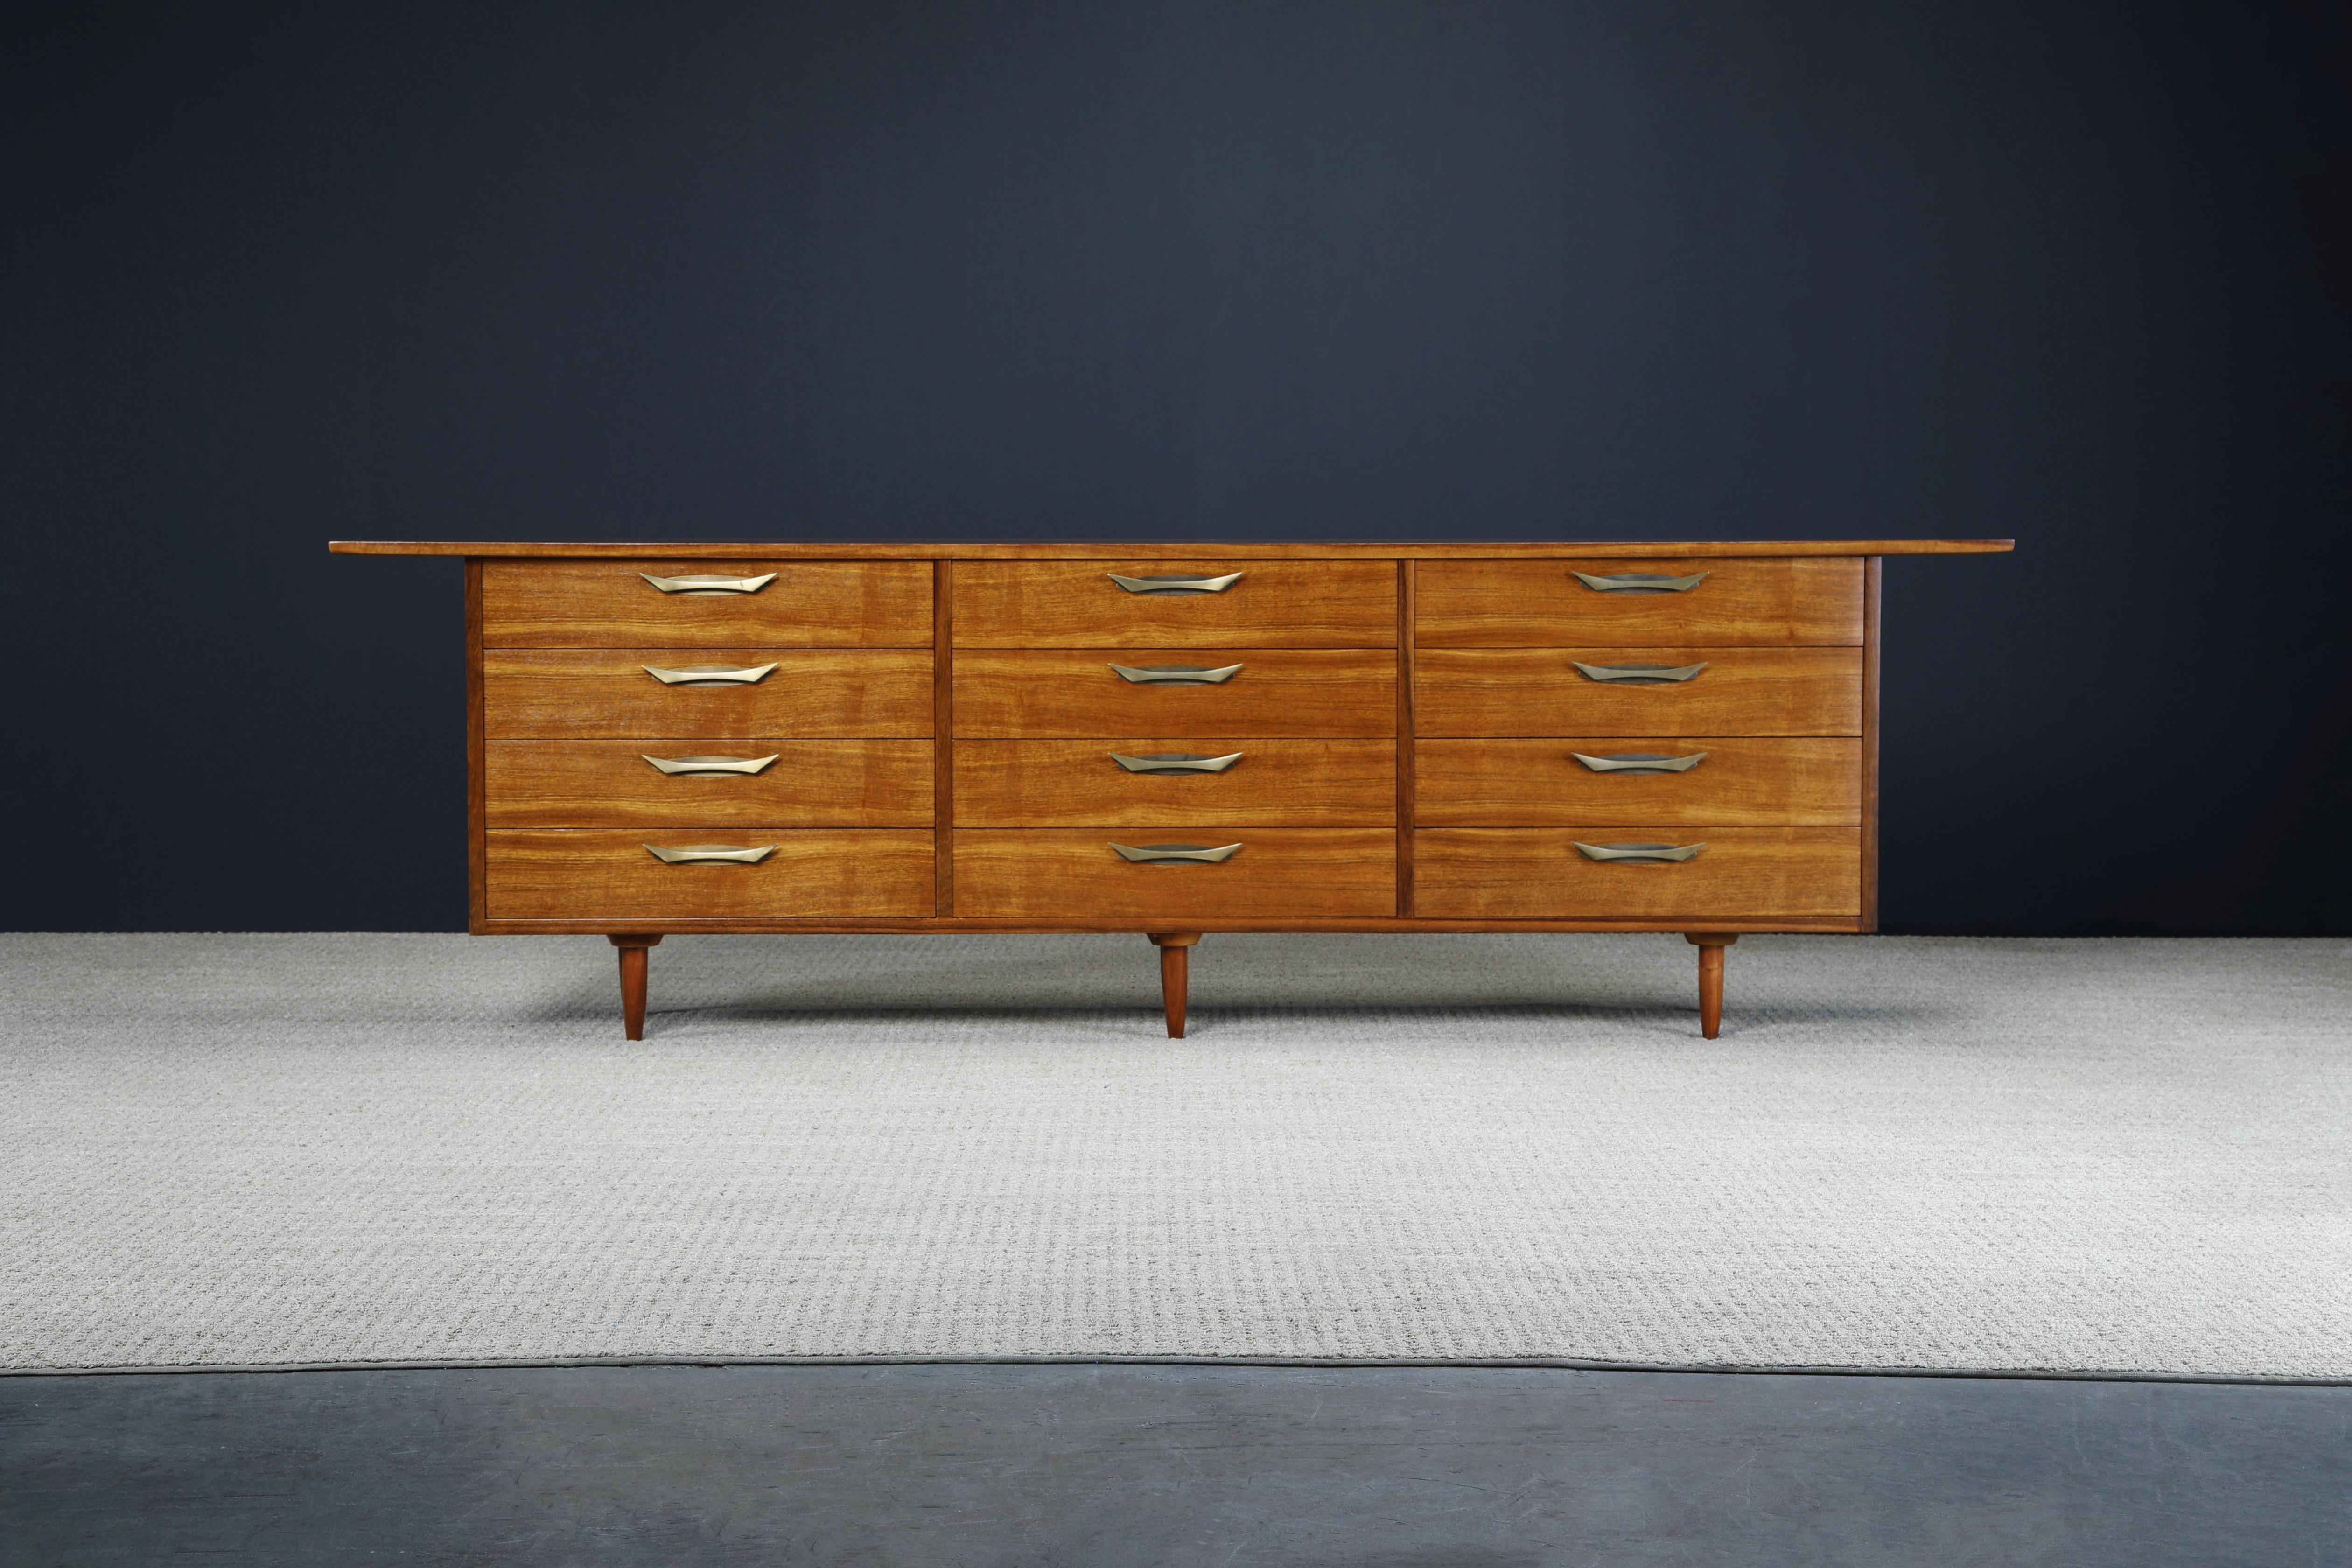 This gorgeous 'Sundra' twelve drawer dresser by George Nakashima for Widdicomb, circa 1960, features beautiful Indian Laurel wood and dramatic large brass handles, which is a much more rare and sought-after variation of this design. Refinished and